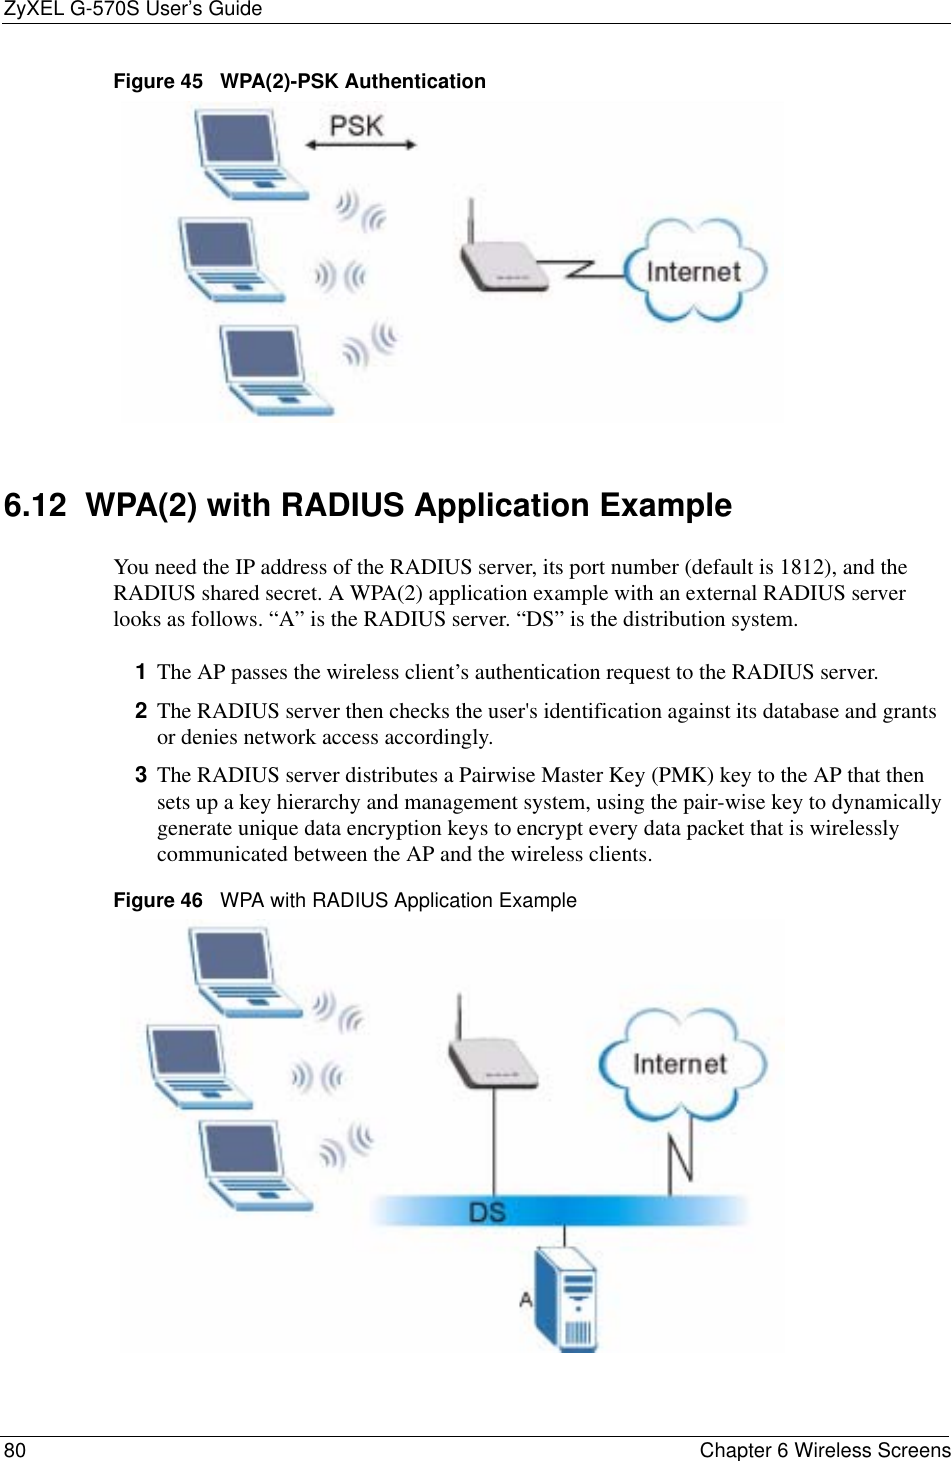 ZyXEL G-570S User’s Guide80 Chapter 6 Wireless ScreensFigure 45   WPA(2)-PSK Authentication6.12  WPA(2) with RADIUS Application ExampleYou need the IP address of the RADIUS server, its port number (default is 1812), and the RADIUS shared secret. A WPA(2) application example with an external RADIUS server looks as follows. “A” is the RADIUS server. “DS” is the distribution system.1The AP passes the wireless client’s authentication request to the RADIUS server.2The RADIUS server then checks the user&apos;s identification against its database and grants or denies network access accordingly.3The RADIUS server distributes a Pairwise Master Key (PMK) key to the AP that then sets up a key hierarchy and management system, using the pair-wise key to dynamically generate unique data encryption keys to encrypt every data packet that is wirelessly communicated between the AP and the wireless clients. Figure 46   WPA with RADIUS Application Example